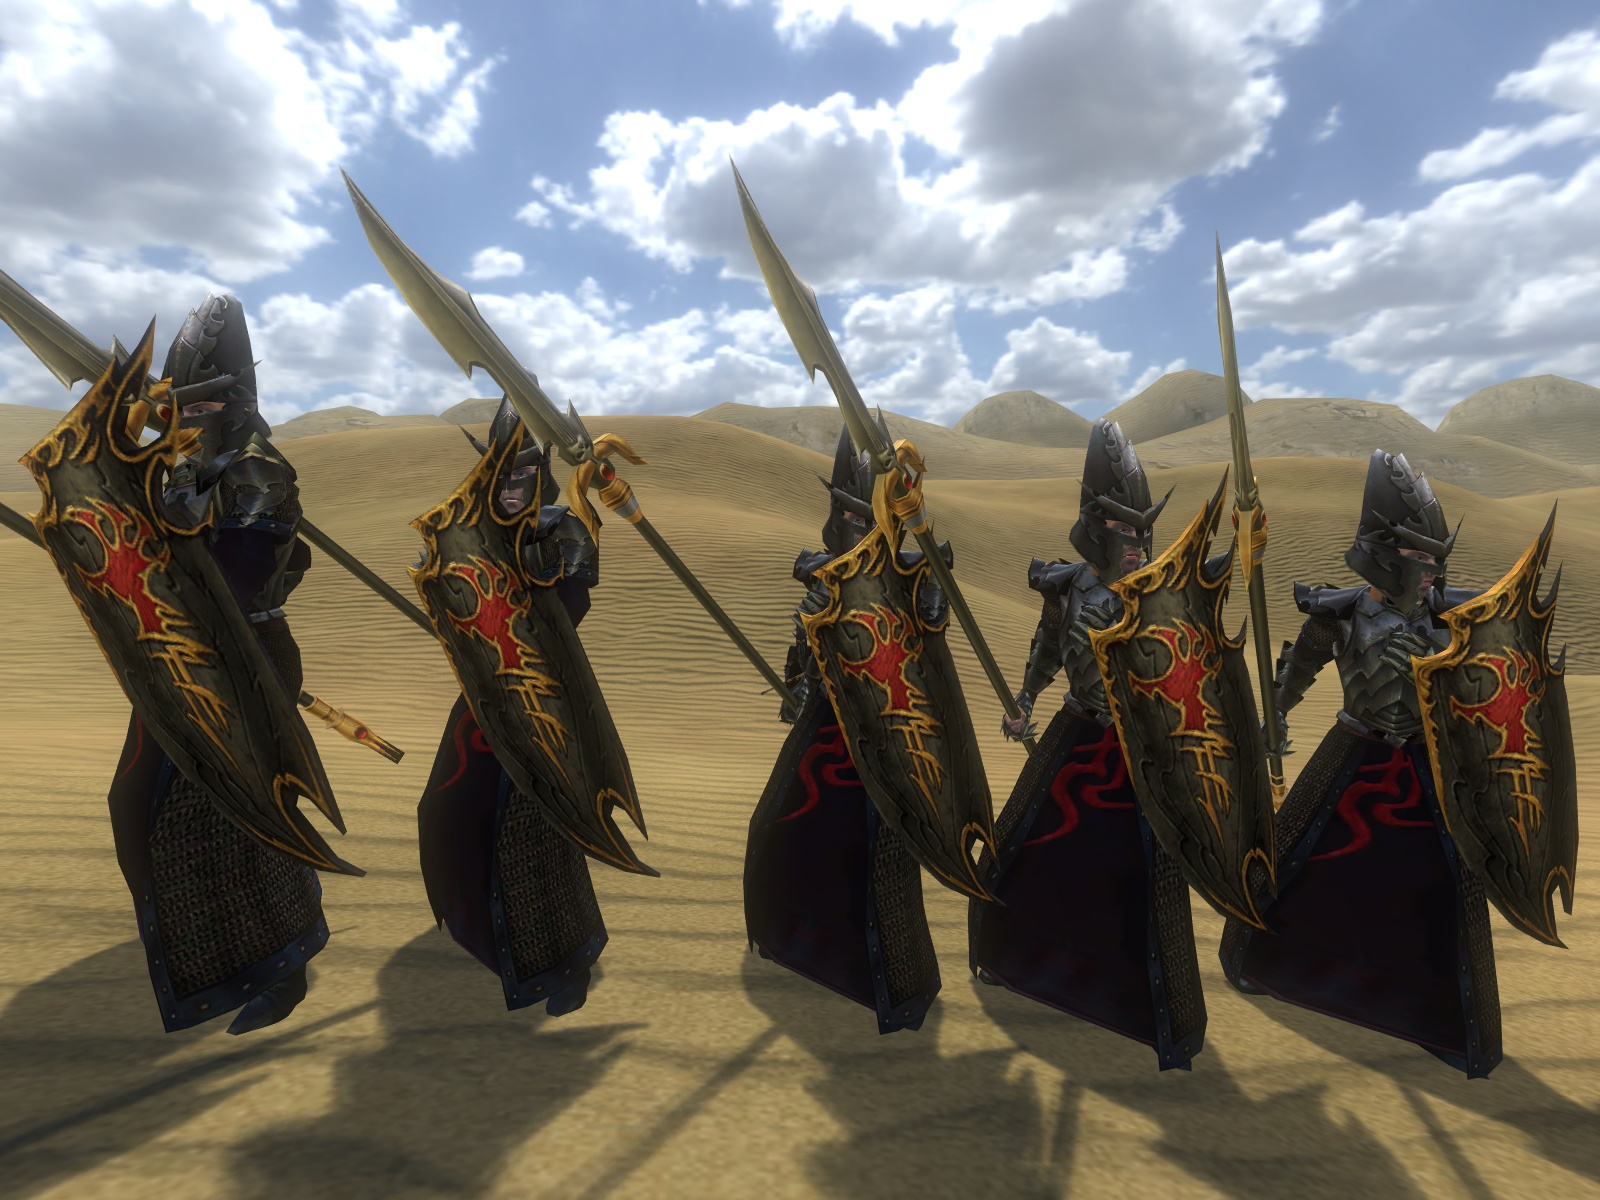 Warband warsword conquest. Warsword Conquest. Mount and Blade Warsword Conquest. Warsword Conquest юниты стража могил.